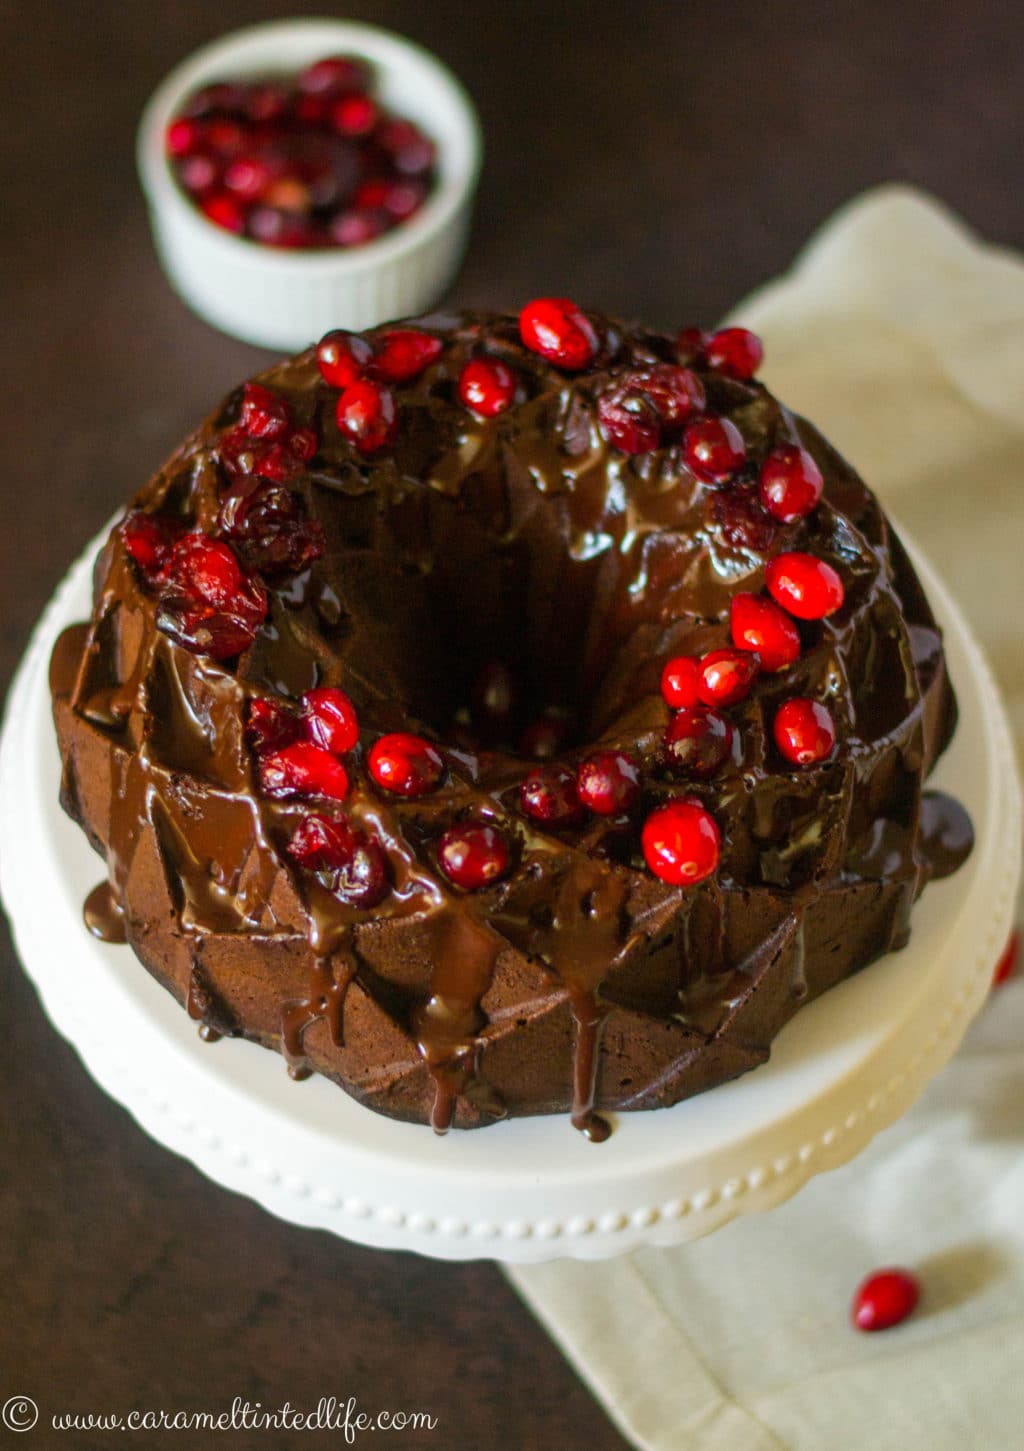 Cranberry Cake with Almond-Butter Sauce Recipe: How to Make It